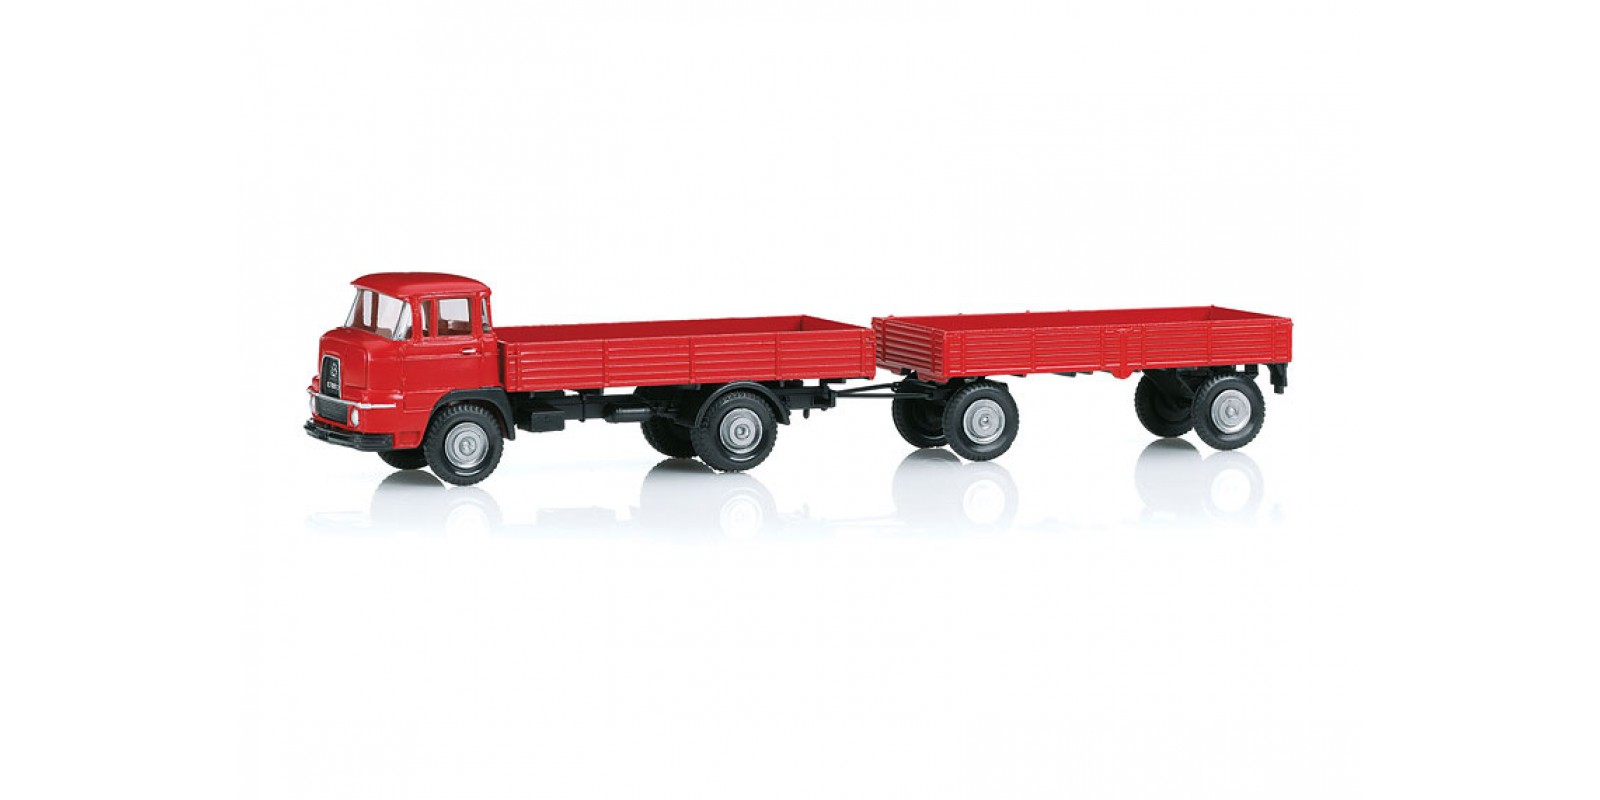 018035 Krupp Flatbed Front Steering Truck with a Trailer